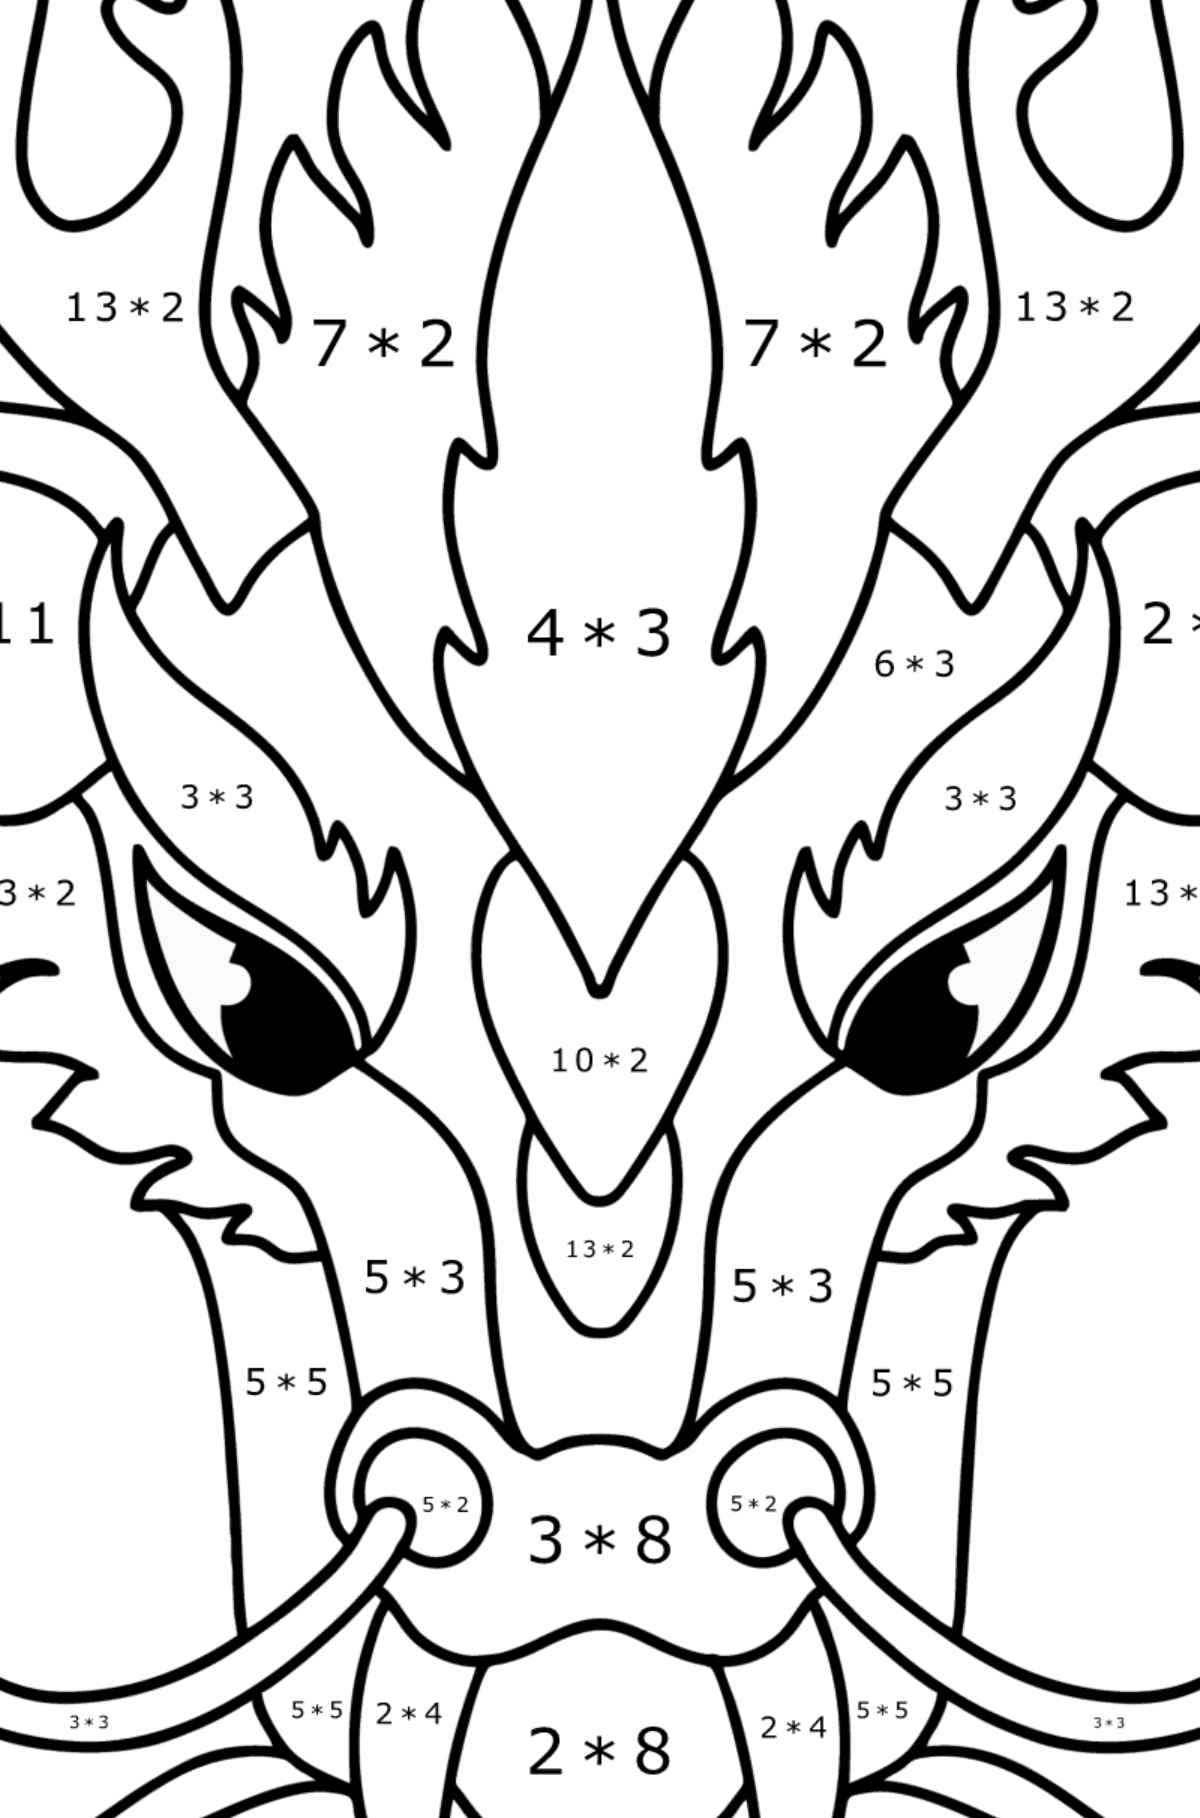 Dragon head coloring page - Math Coloring - Multiplication for Kids